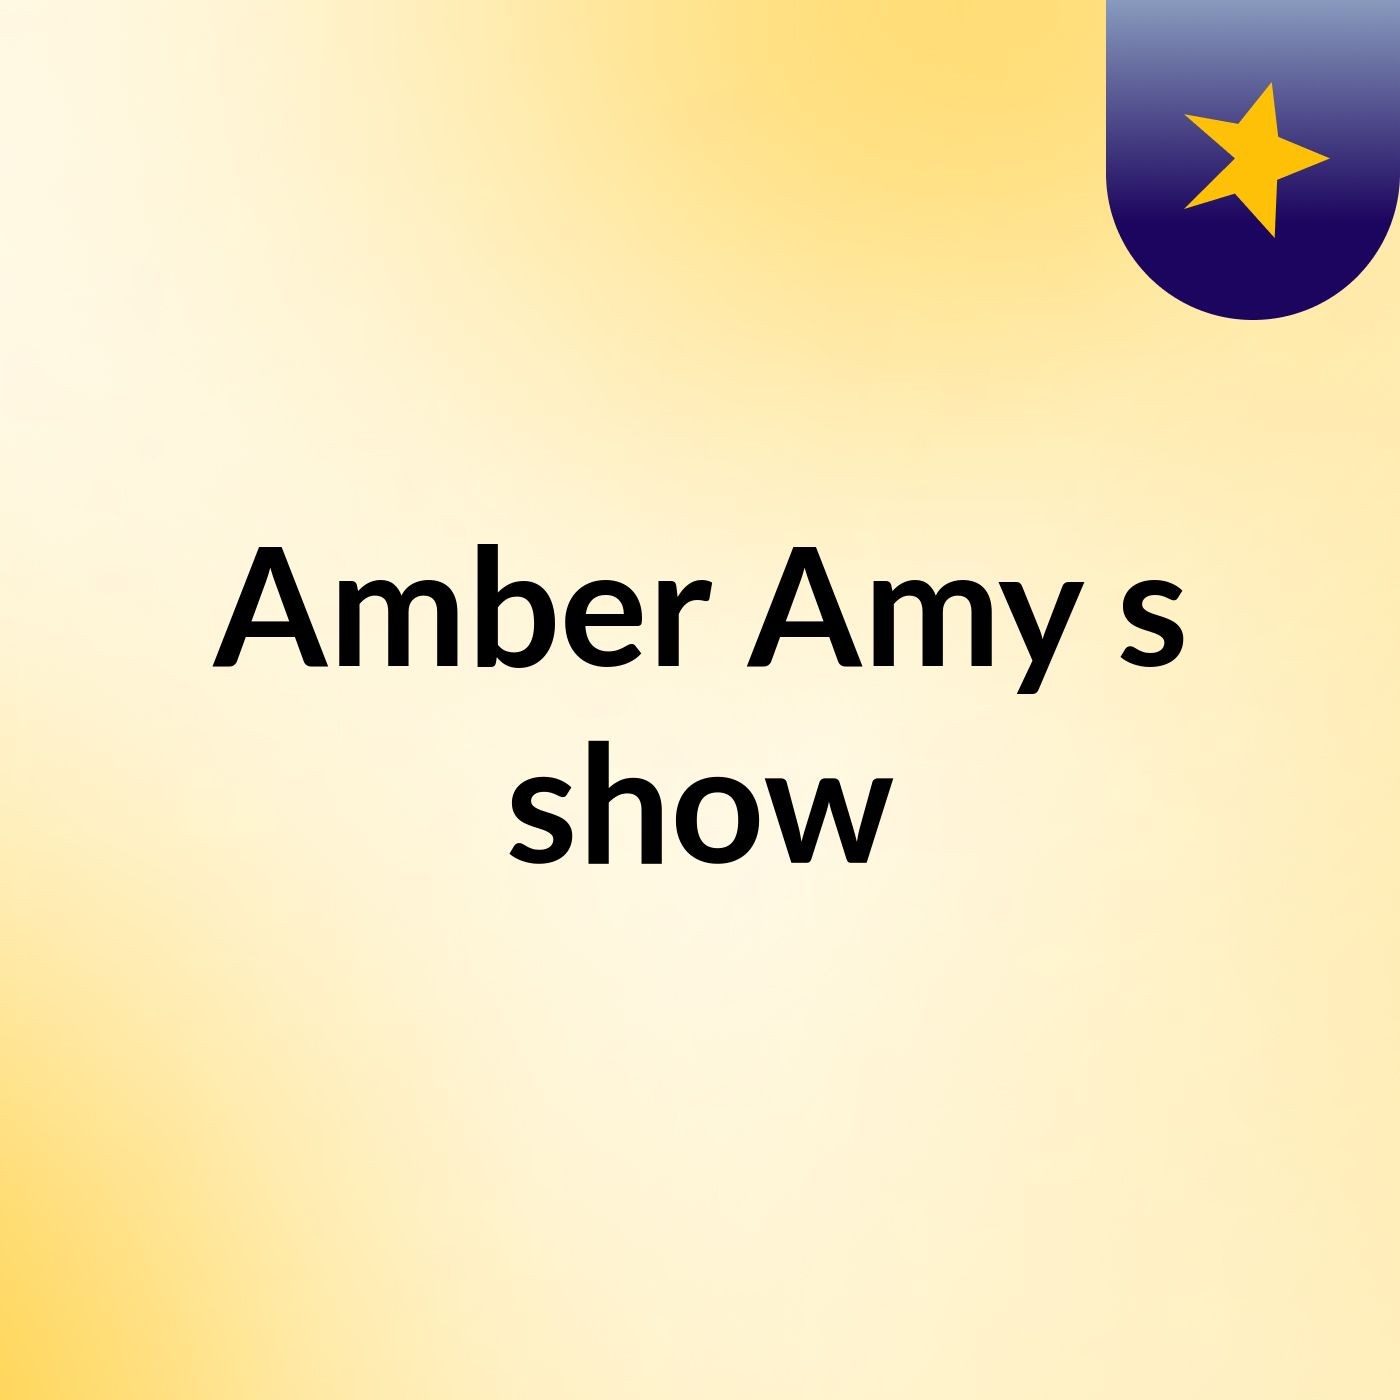 Amber Amy's show